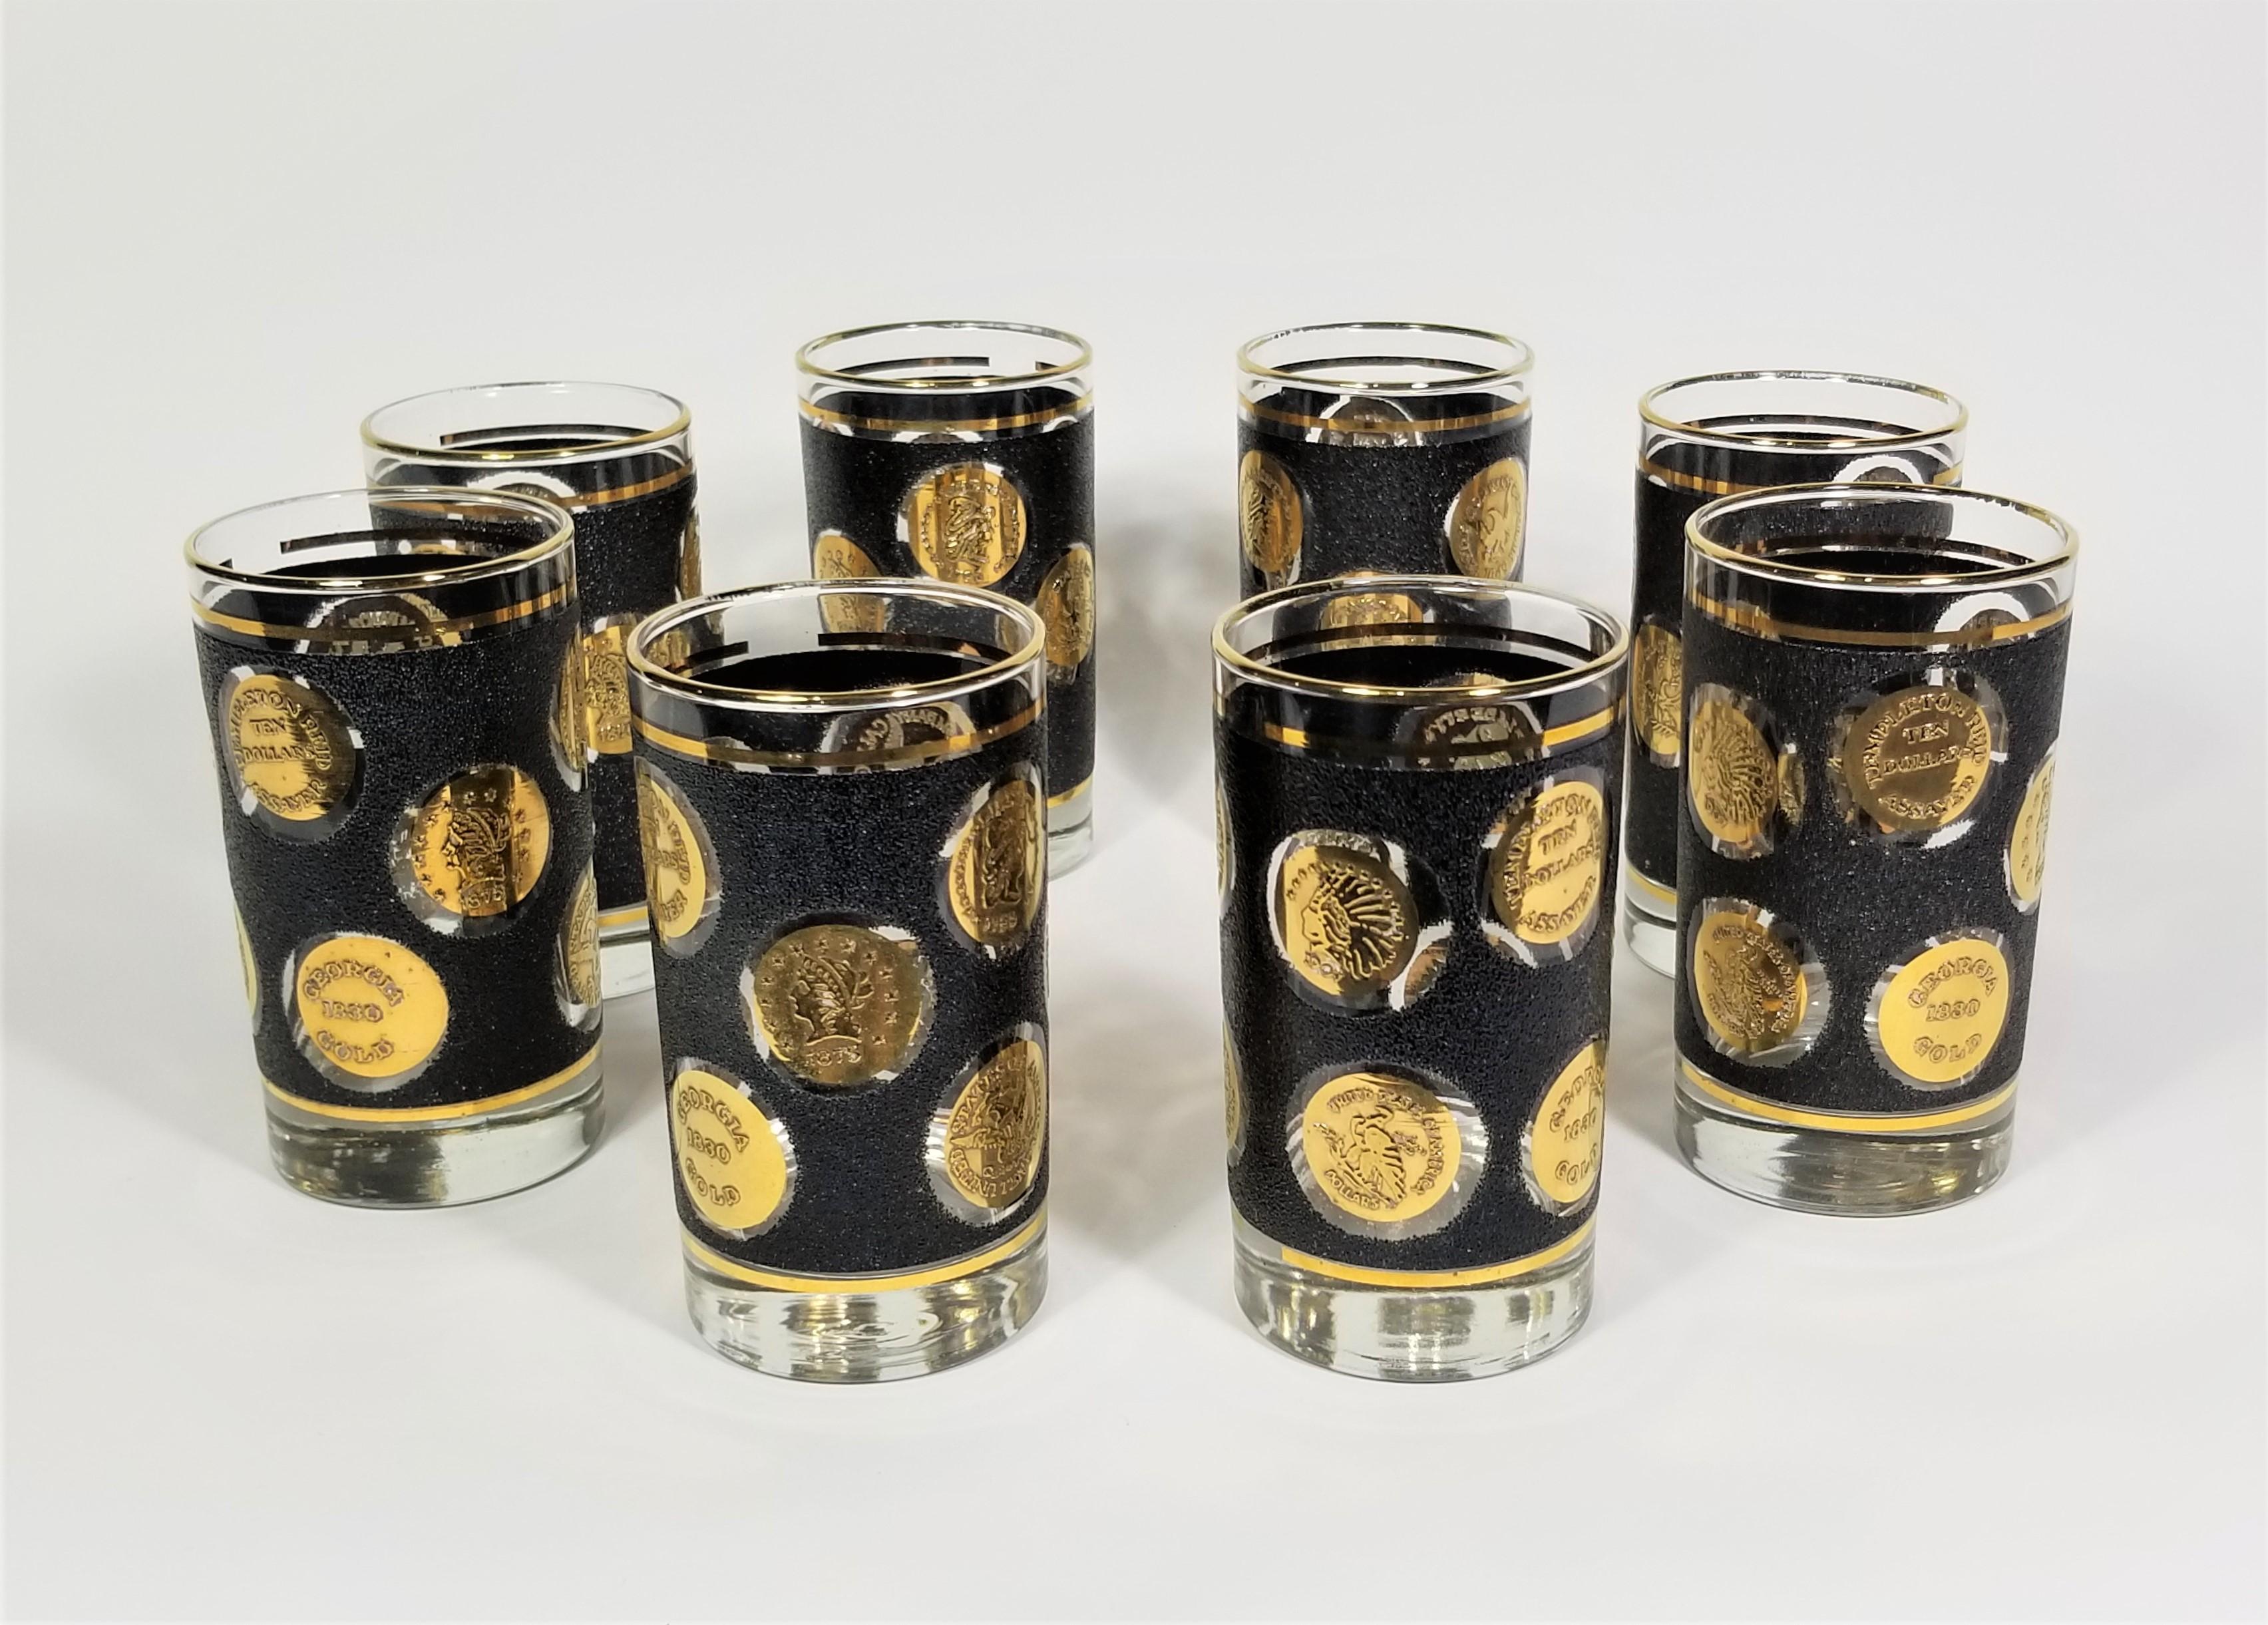 Mid-century 1960s Libbey glassware barware. Gold coin and black design. Set of 8 12 oz glasses. 

Set was in the Original Box and appears to be unused.